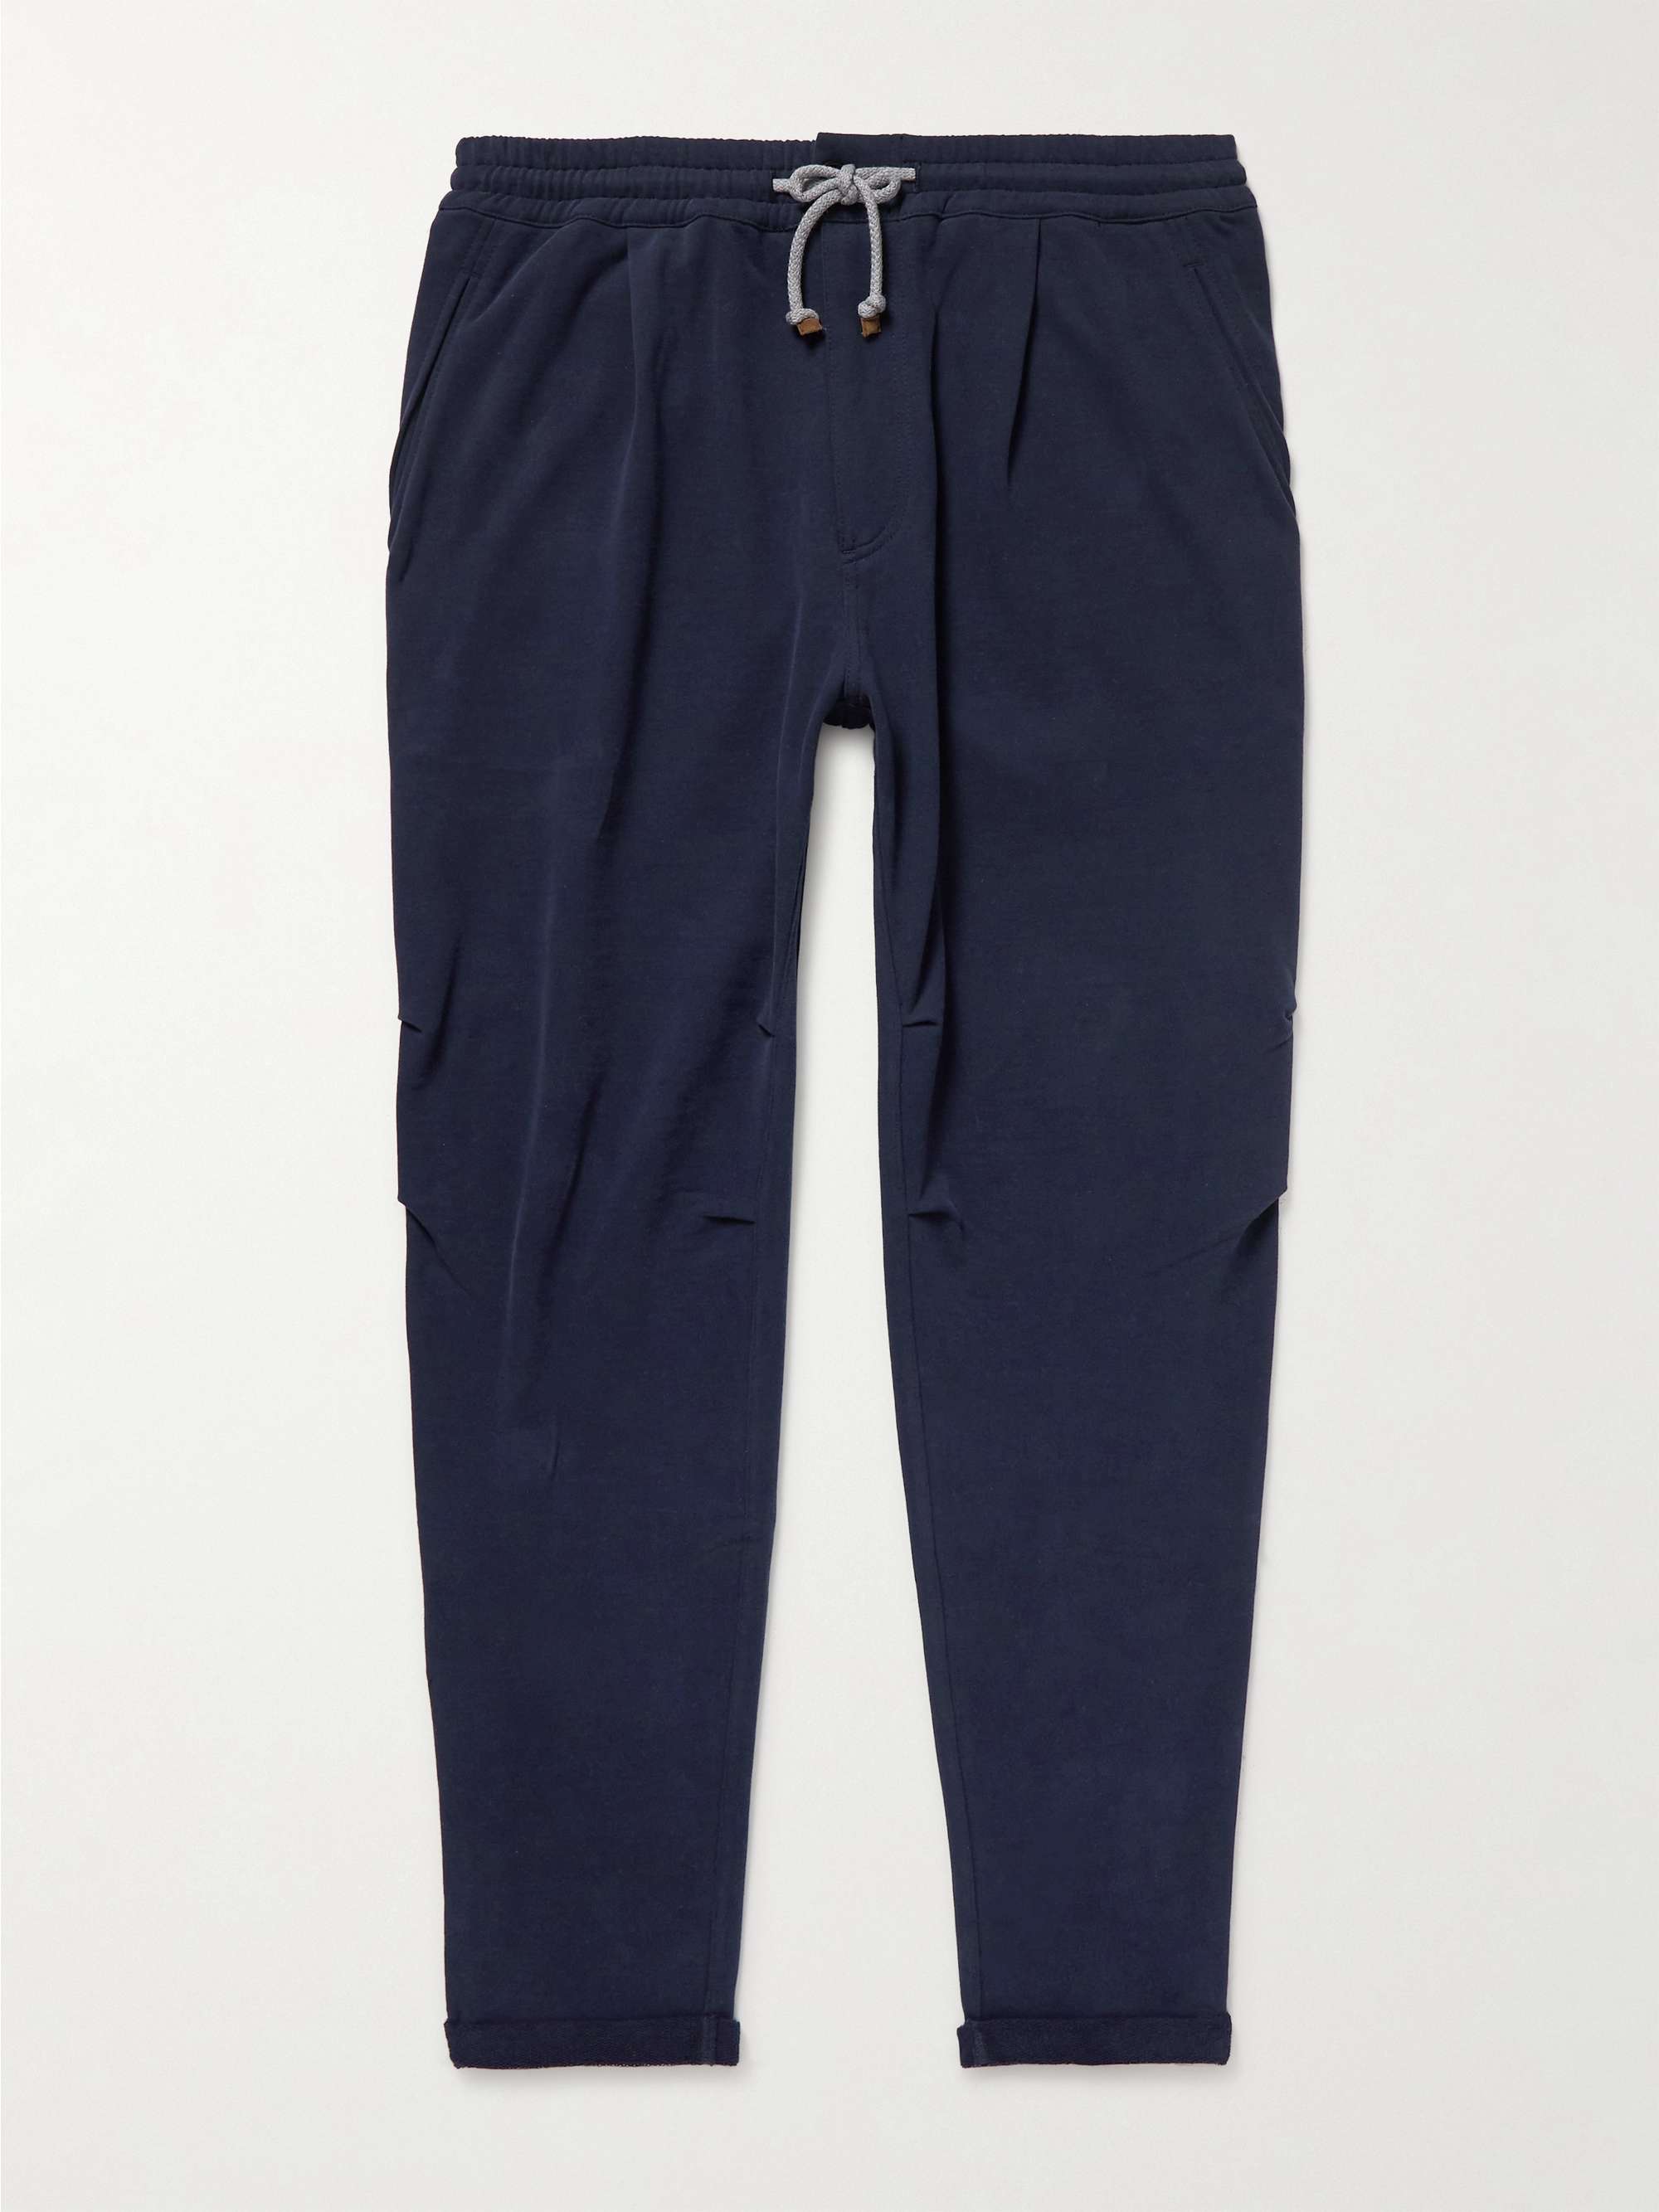 Navy Tapered Pleated Cotton-Jersey Sweatpants | BRUNELLO CUCINELLI | MR  PORTER